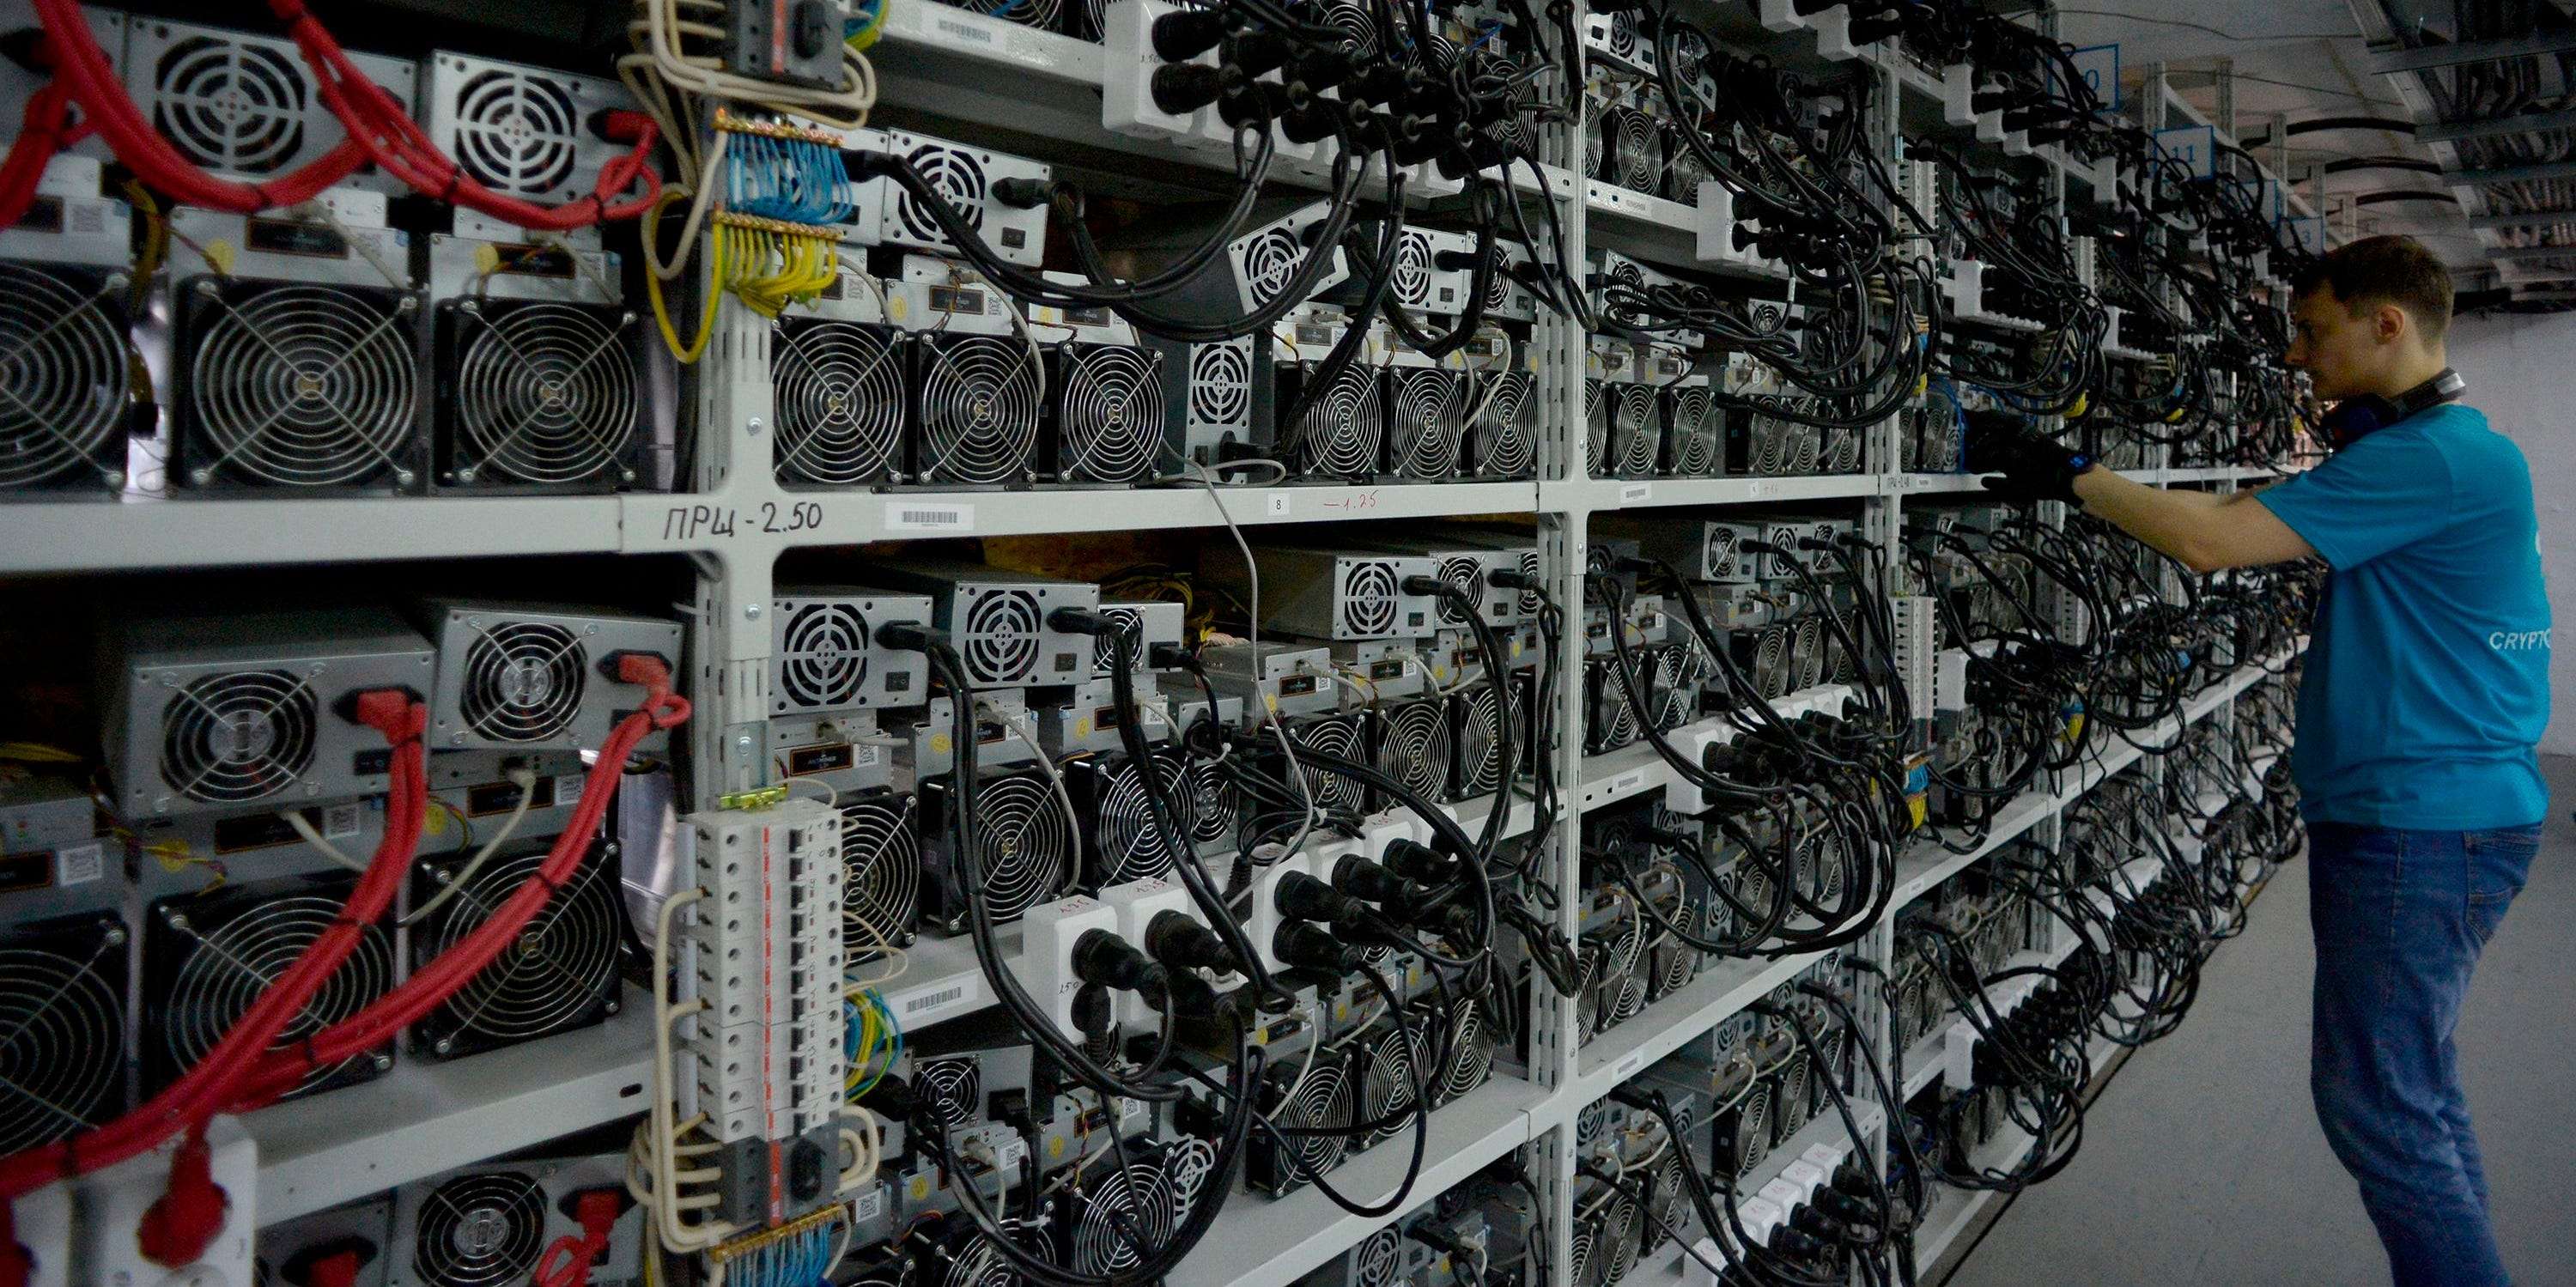 Iran has issued 30 crypto mining licenses despite a ban on ...